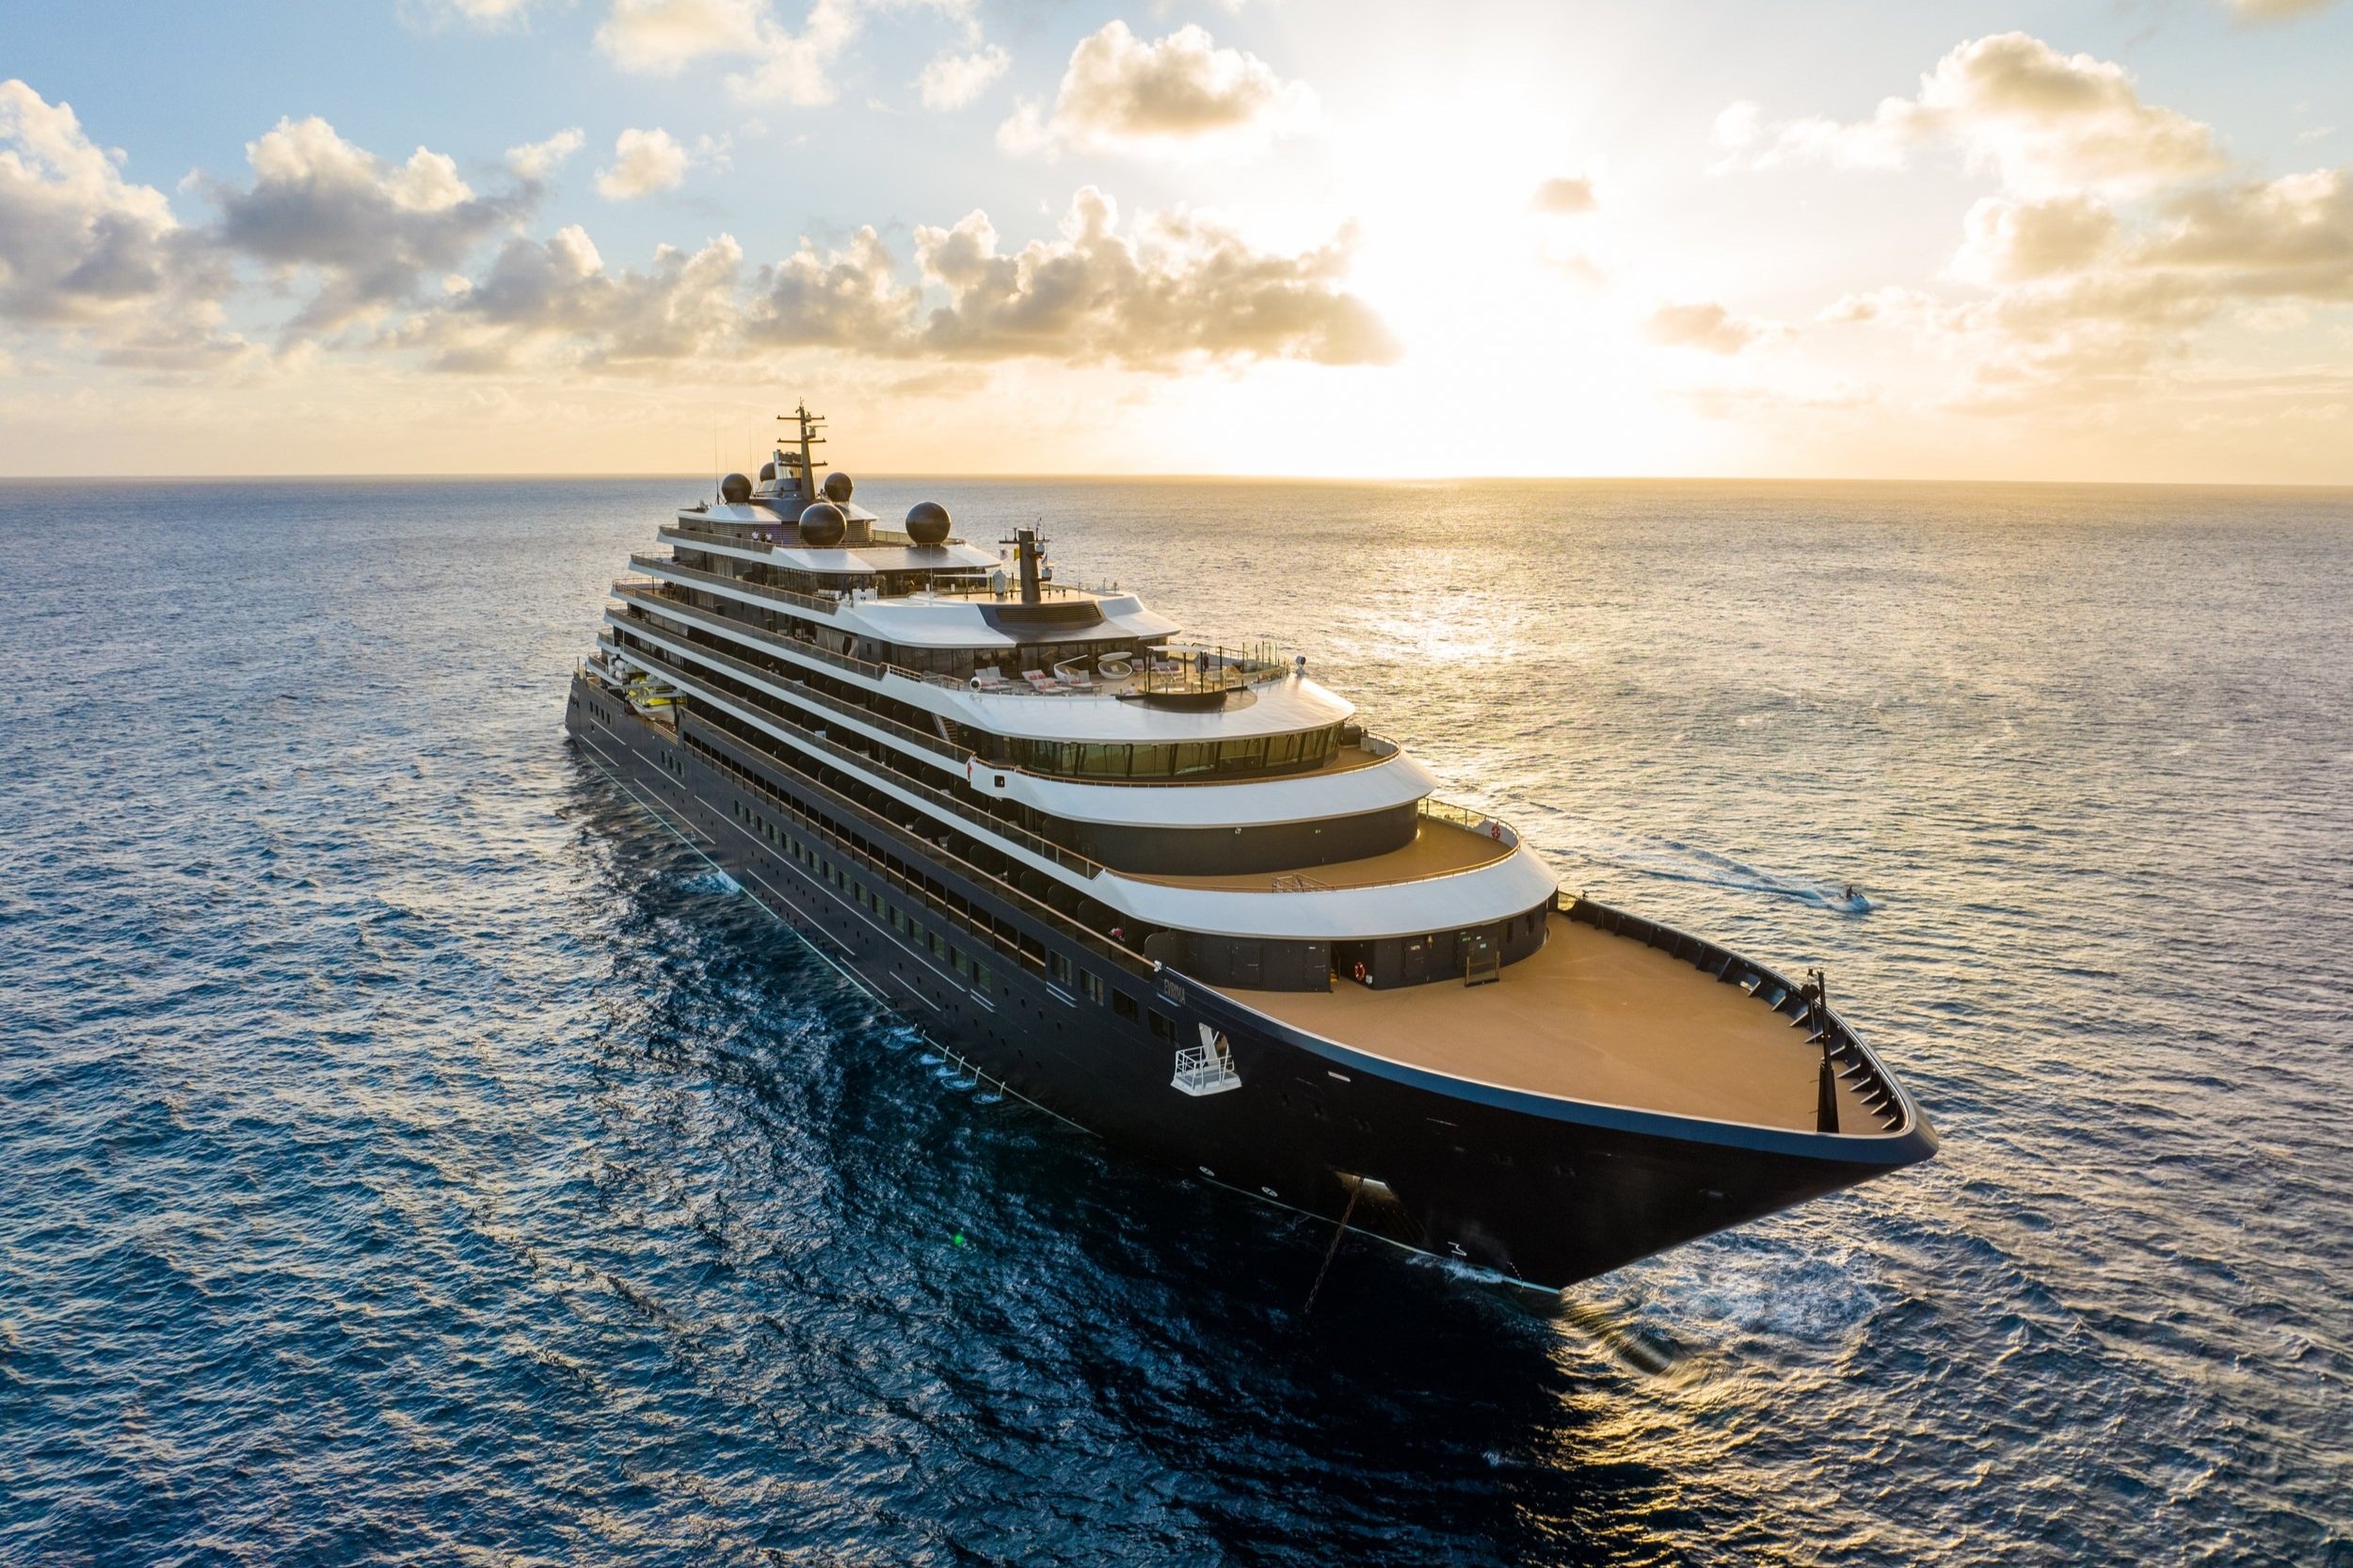 What It's Like On Board Evrima, The Ritz-Carlton's First Ship